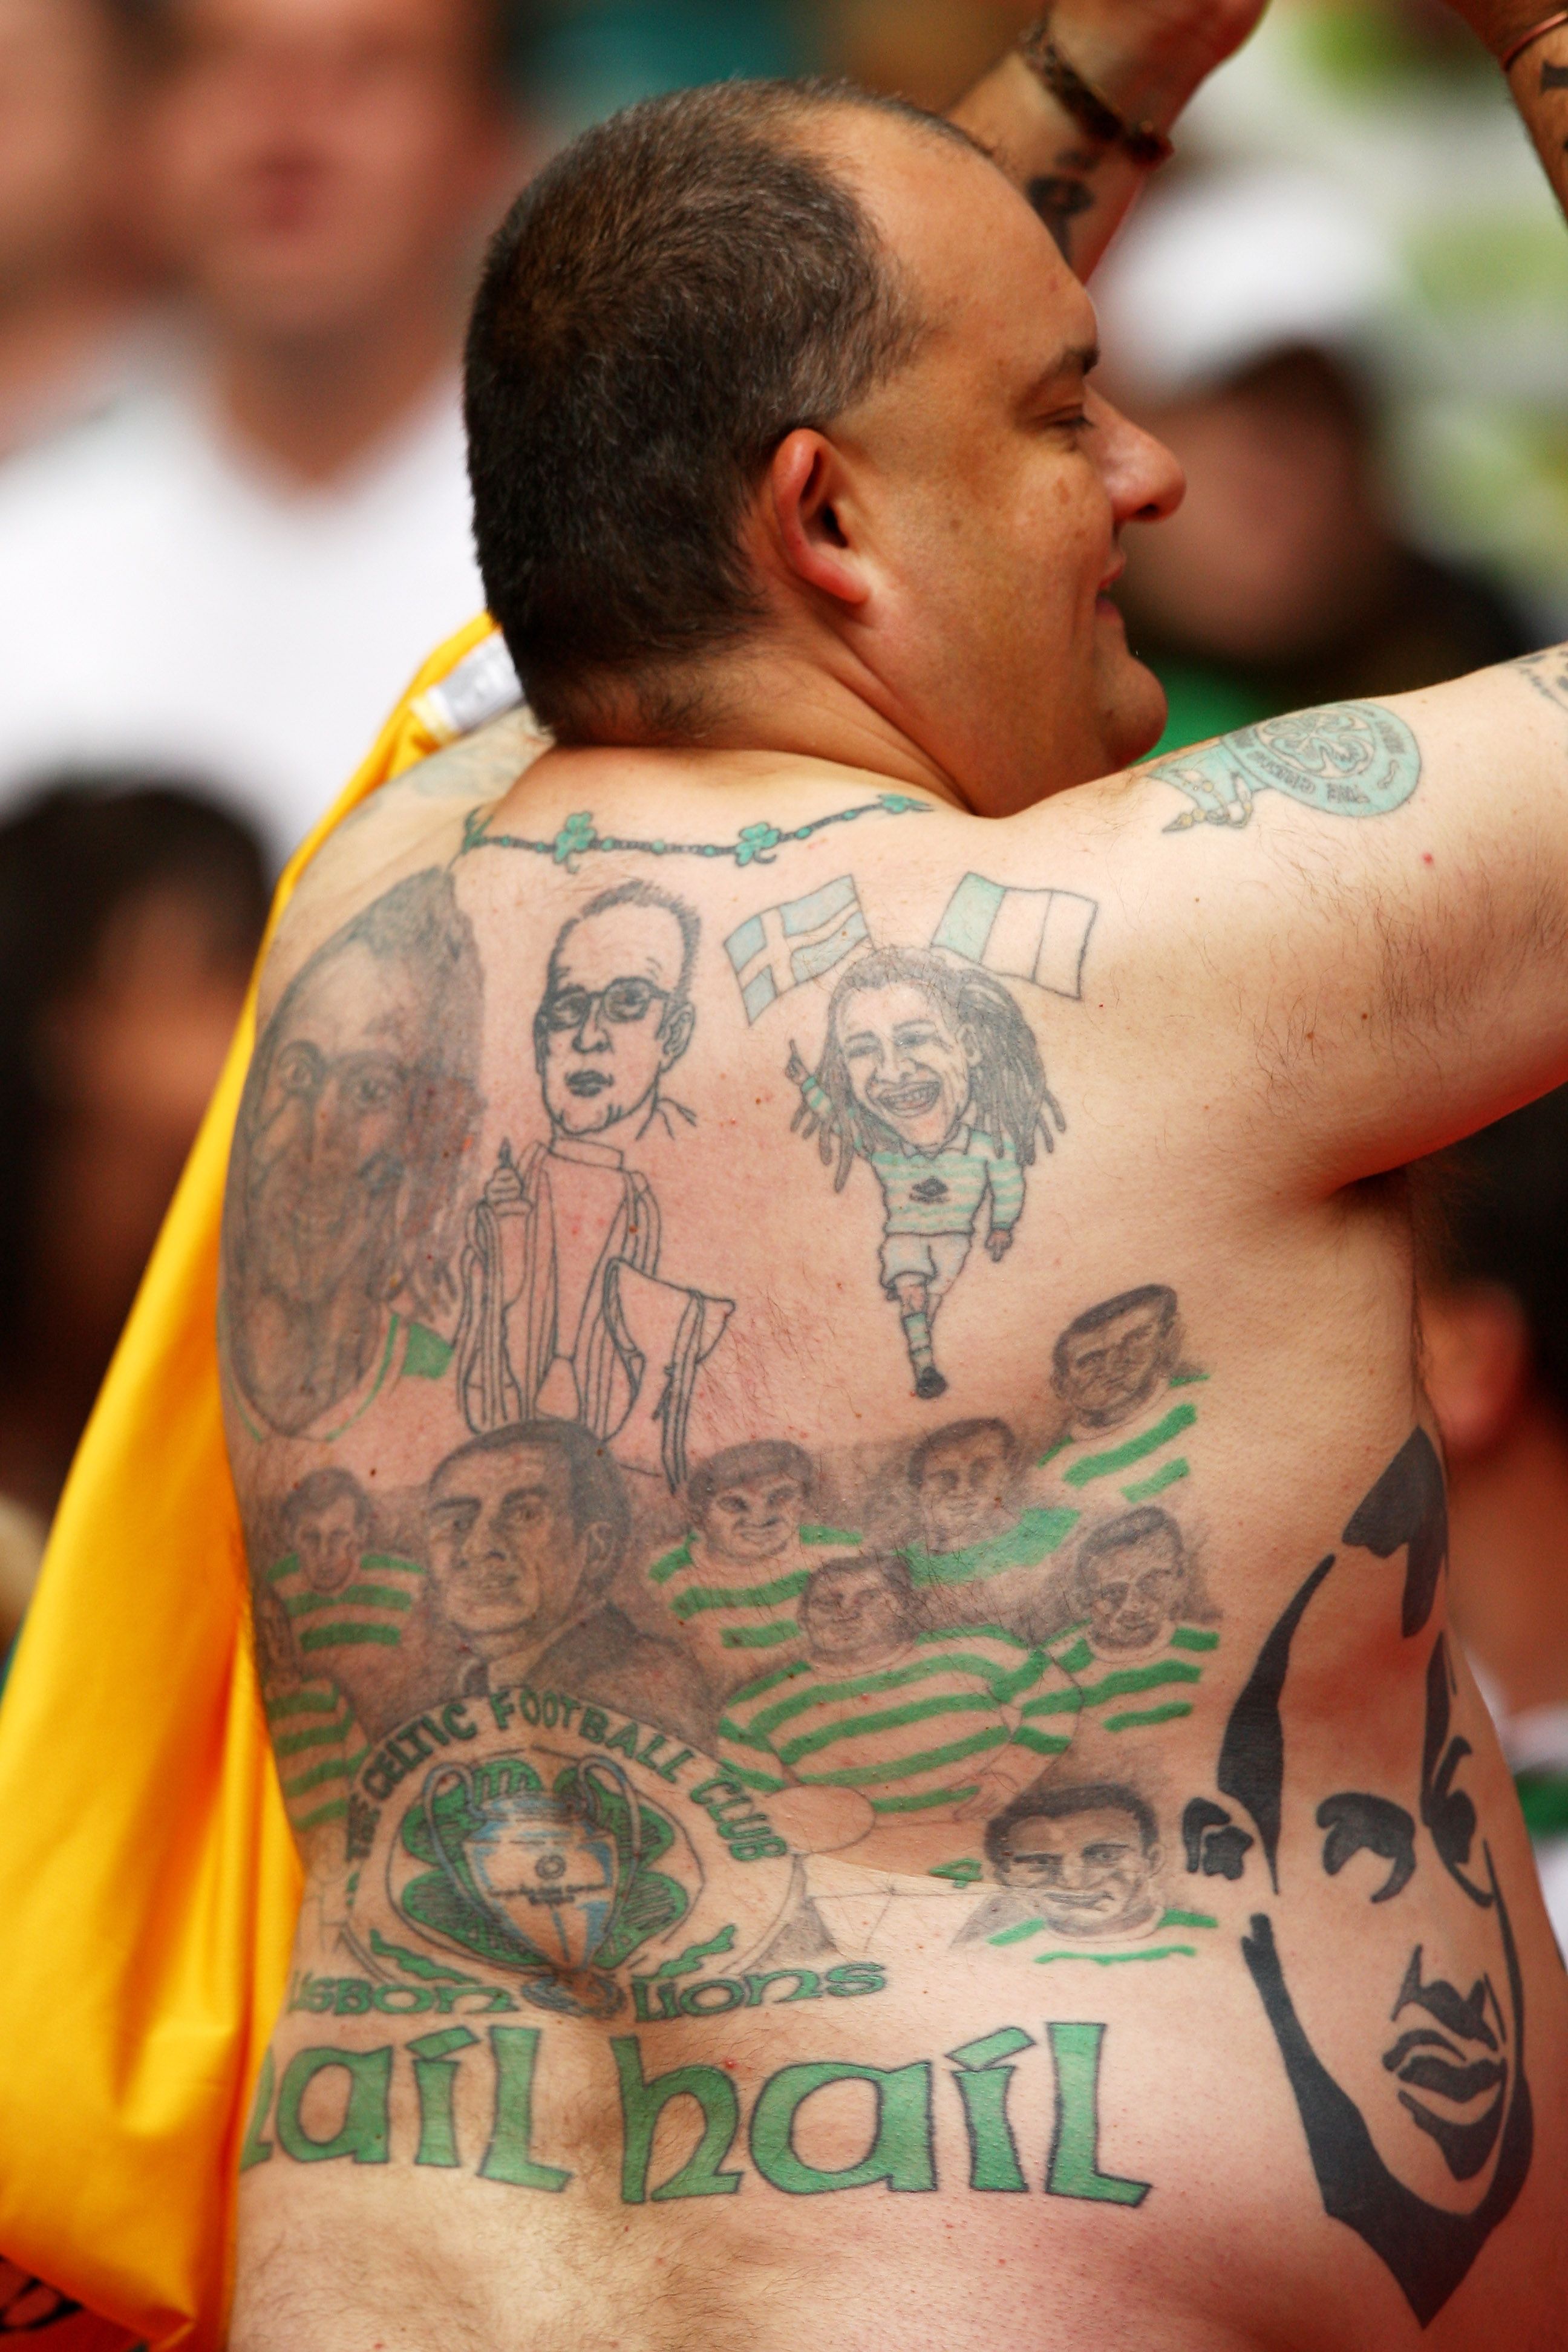 LONDON, ENGLAND - JULY 26: A celtic fan displays his tattoos during the Wembley Cup match between Celtic and Tottenham Hotspur at Wembley Stadium on July 26, 2009 in London, England. (Photo by Richard Heathcote/Getty Images)